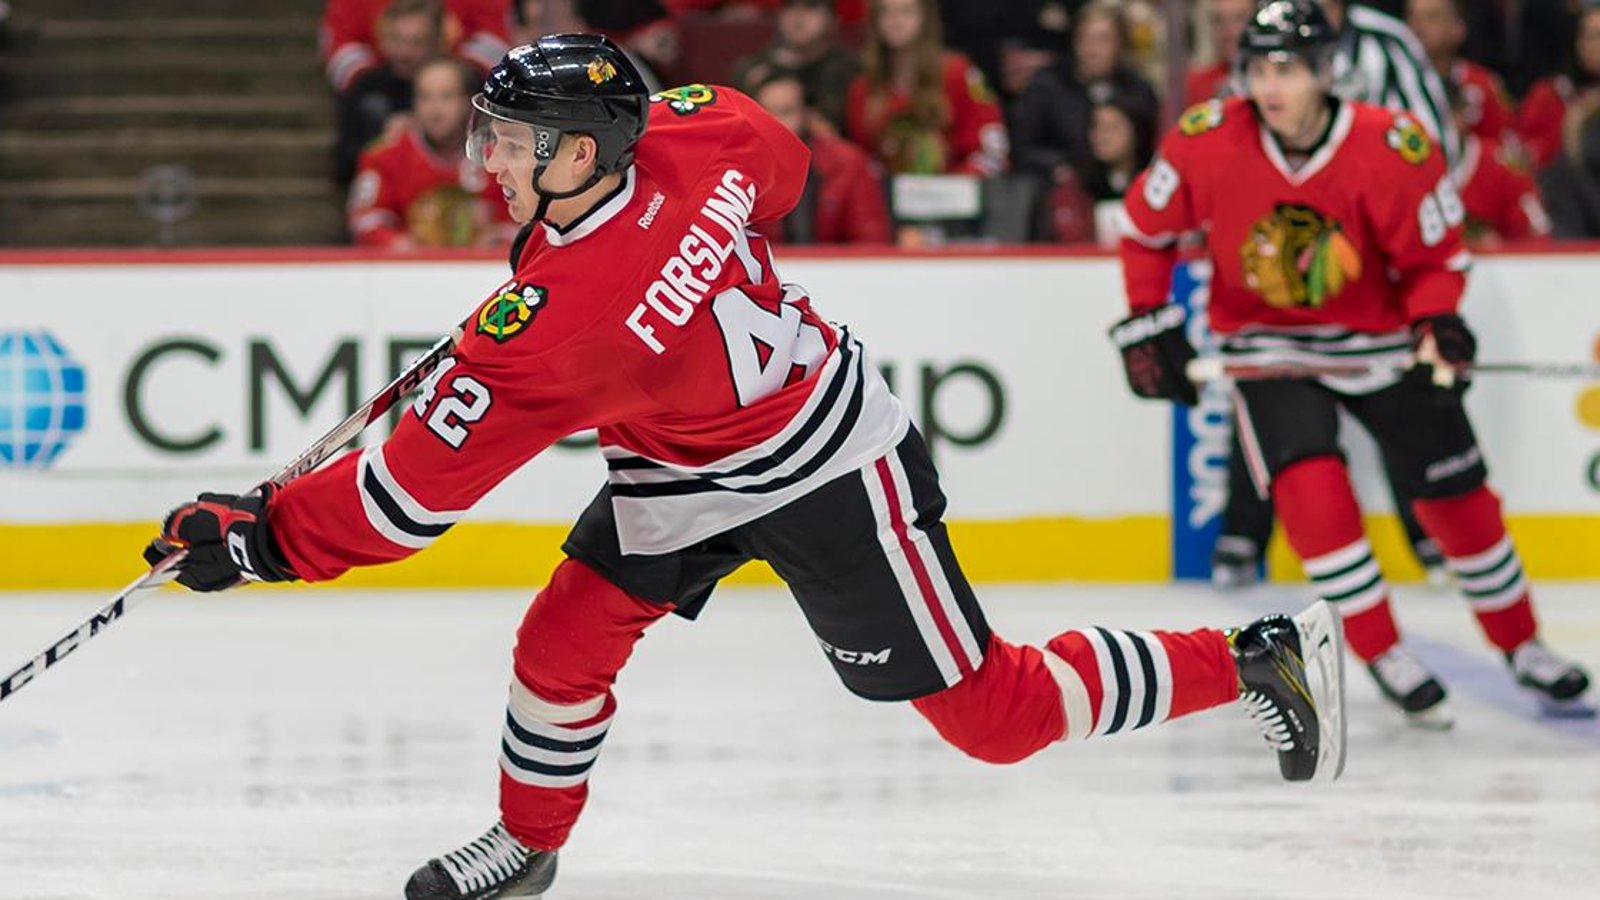 Report: Hawks’ Forsling suffers brutal injury after taking puck in the mouth